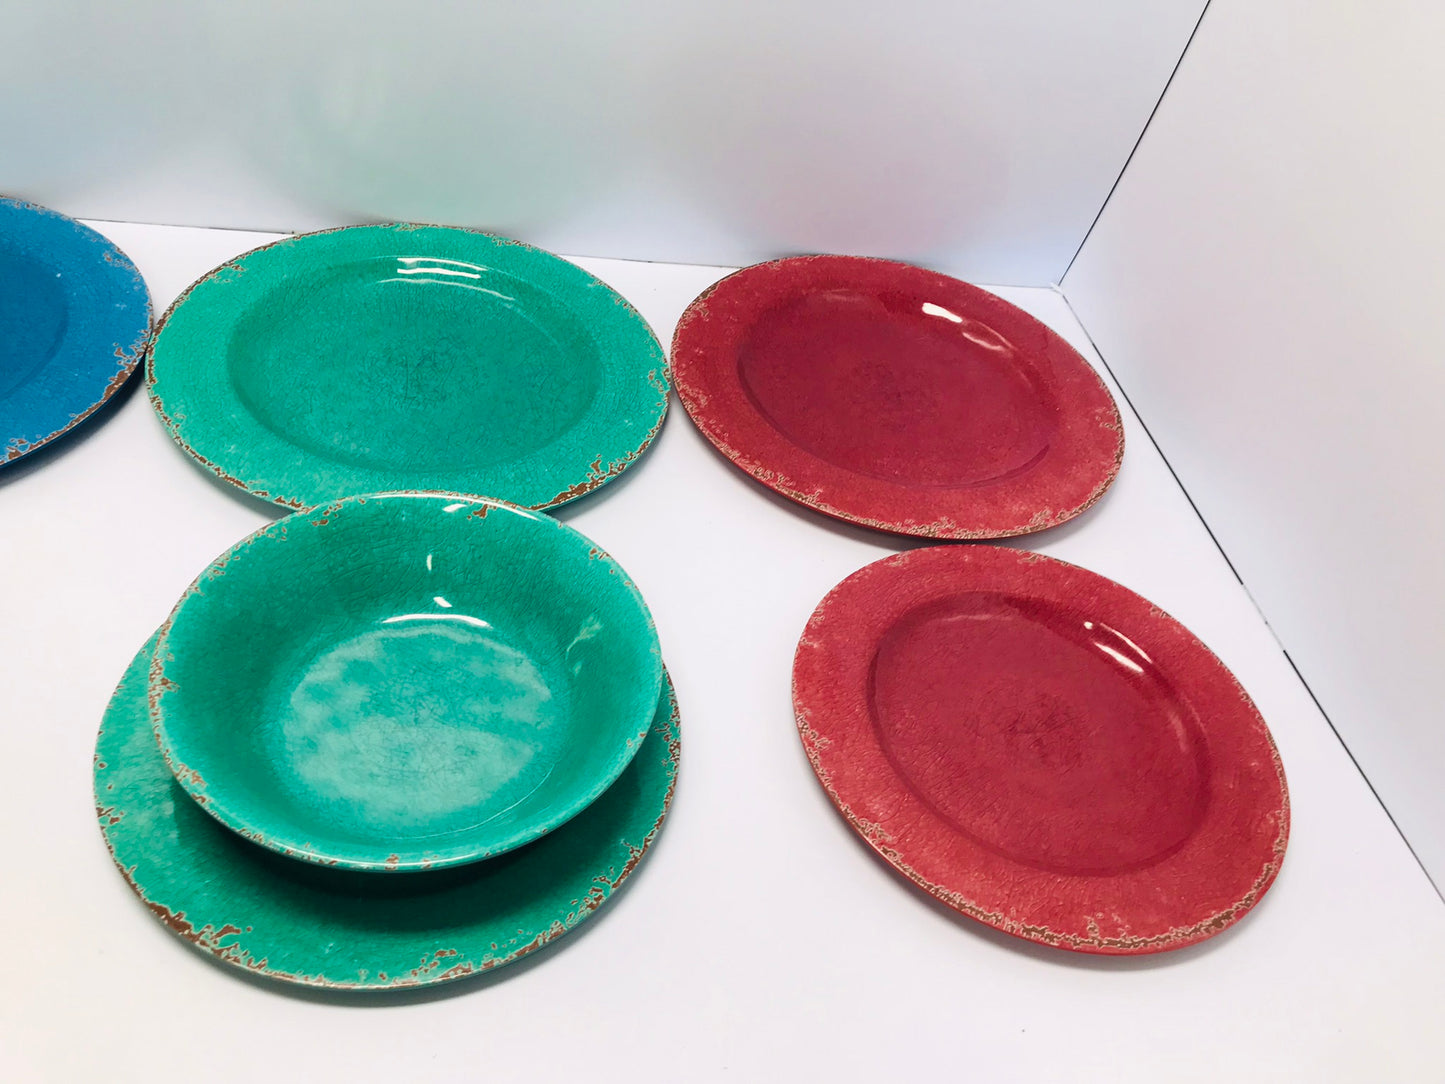 Camping Fishing Dishes Studio California Melmac Style Plates and Bowles 1 bowl Missing